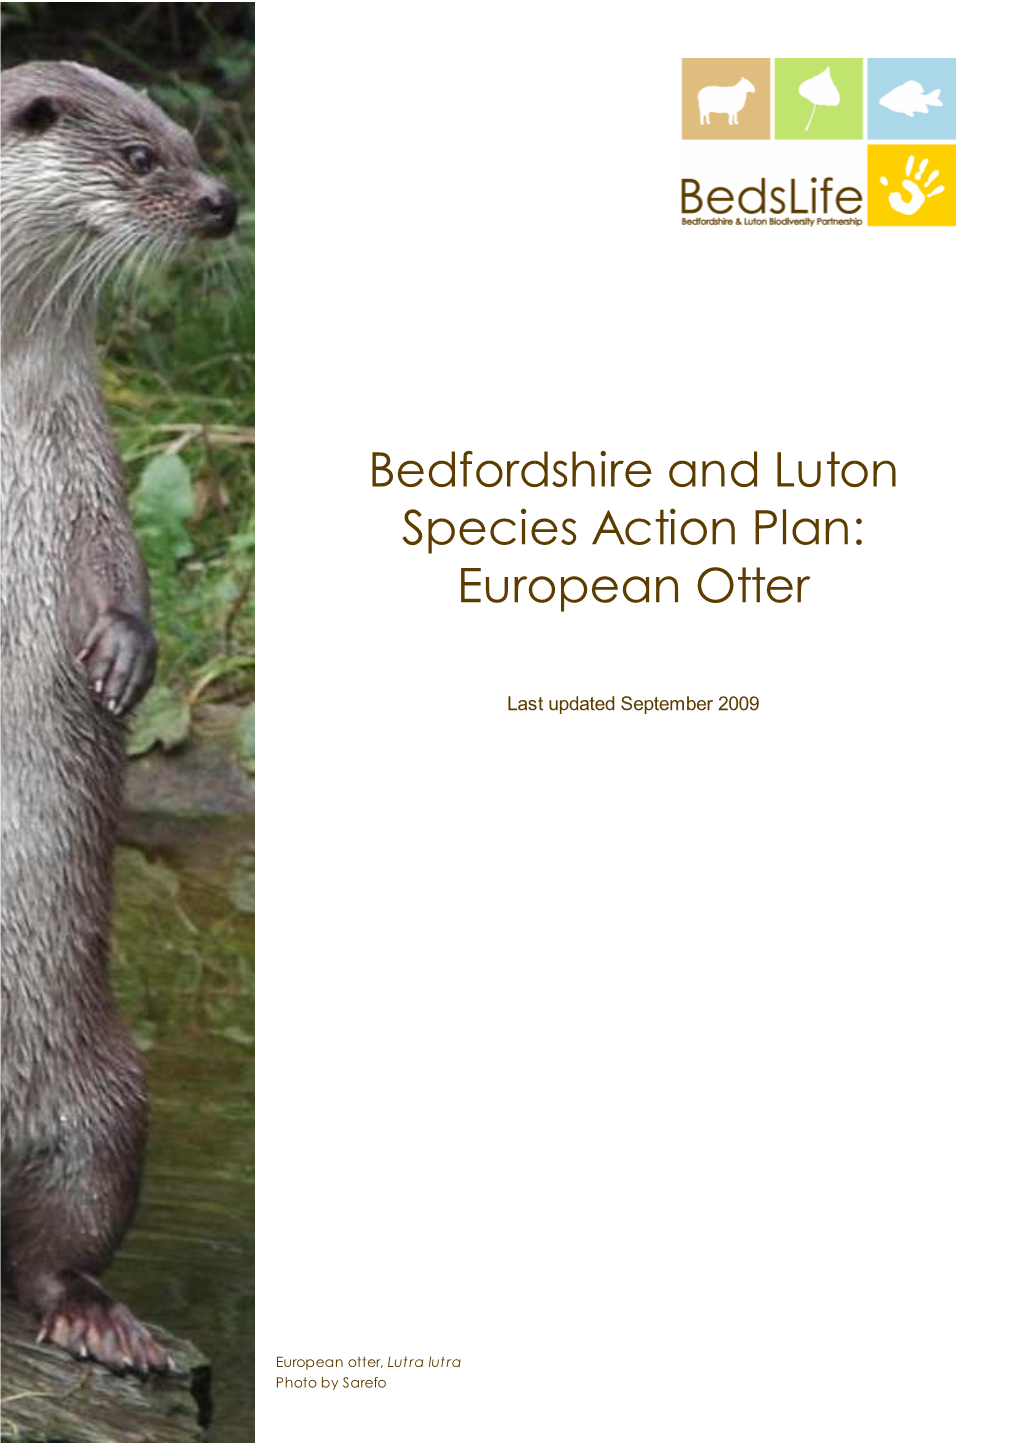 Bedfordshire and Luton Species Action Plan: European Otter